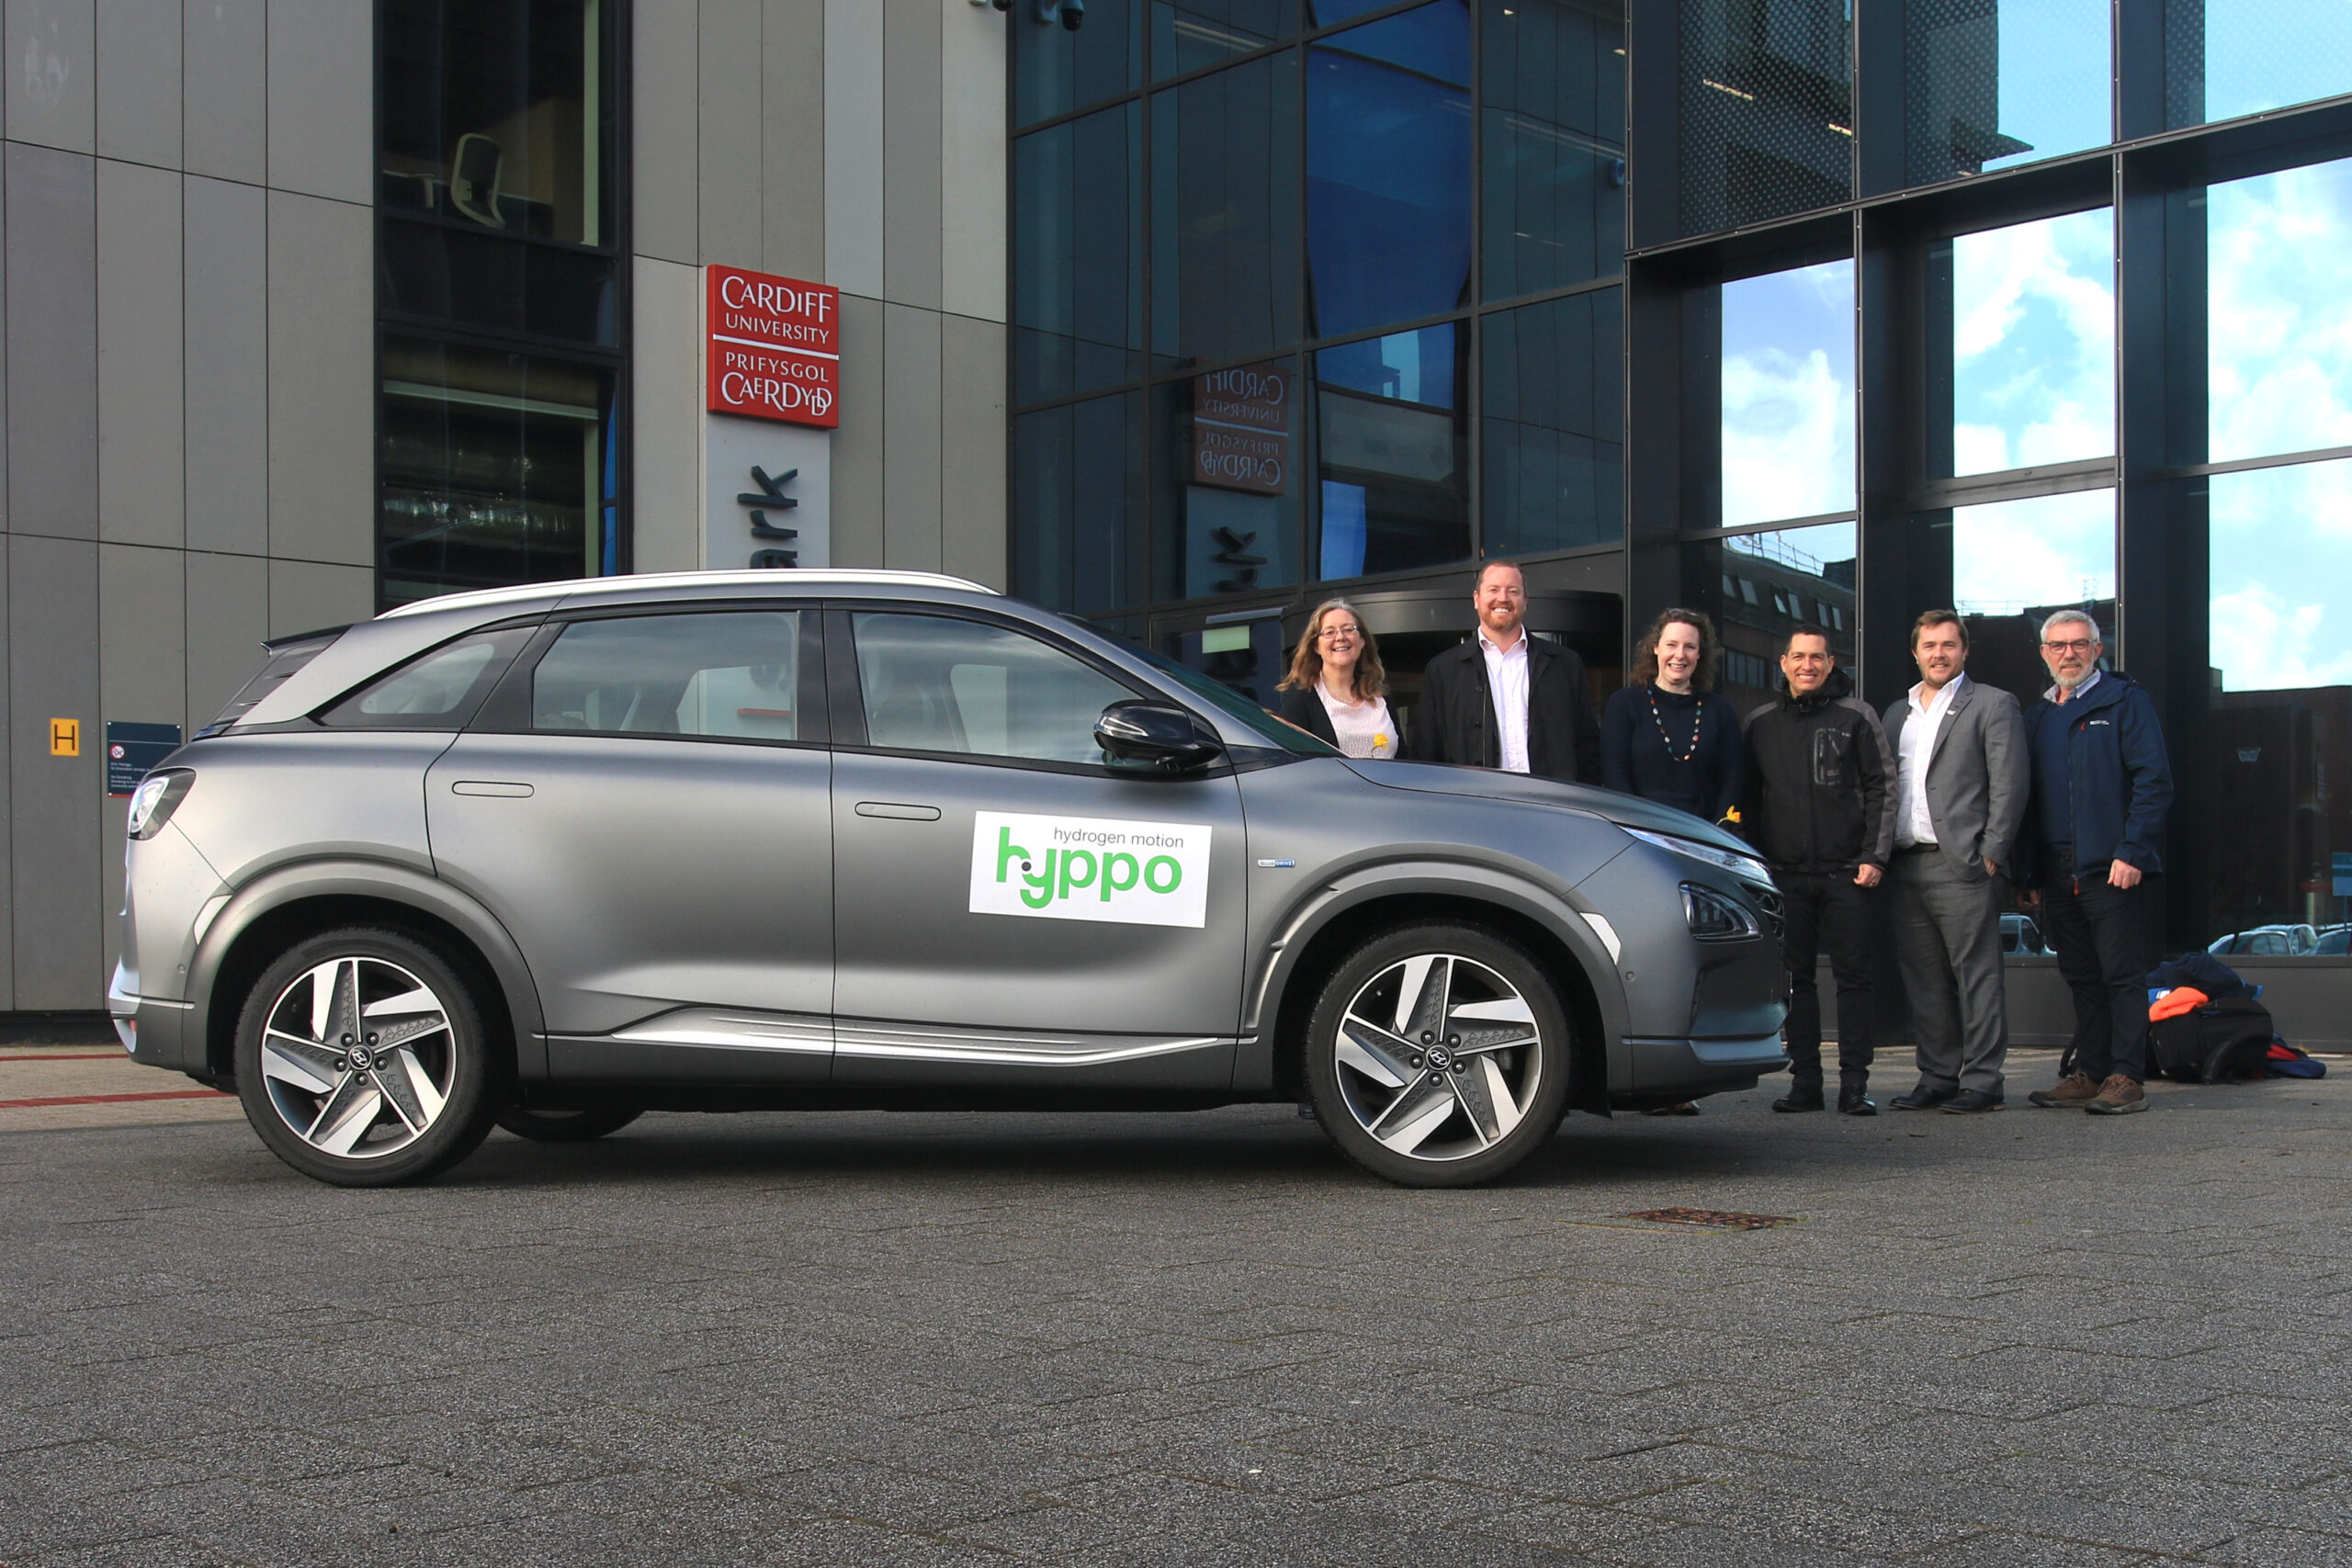 Group of people stood behind a hydrogen car